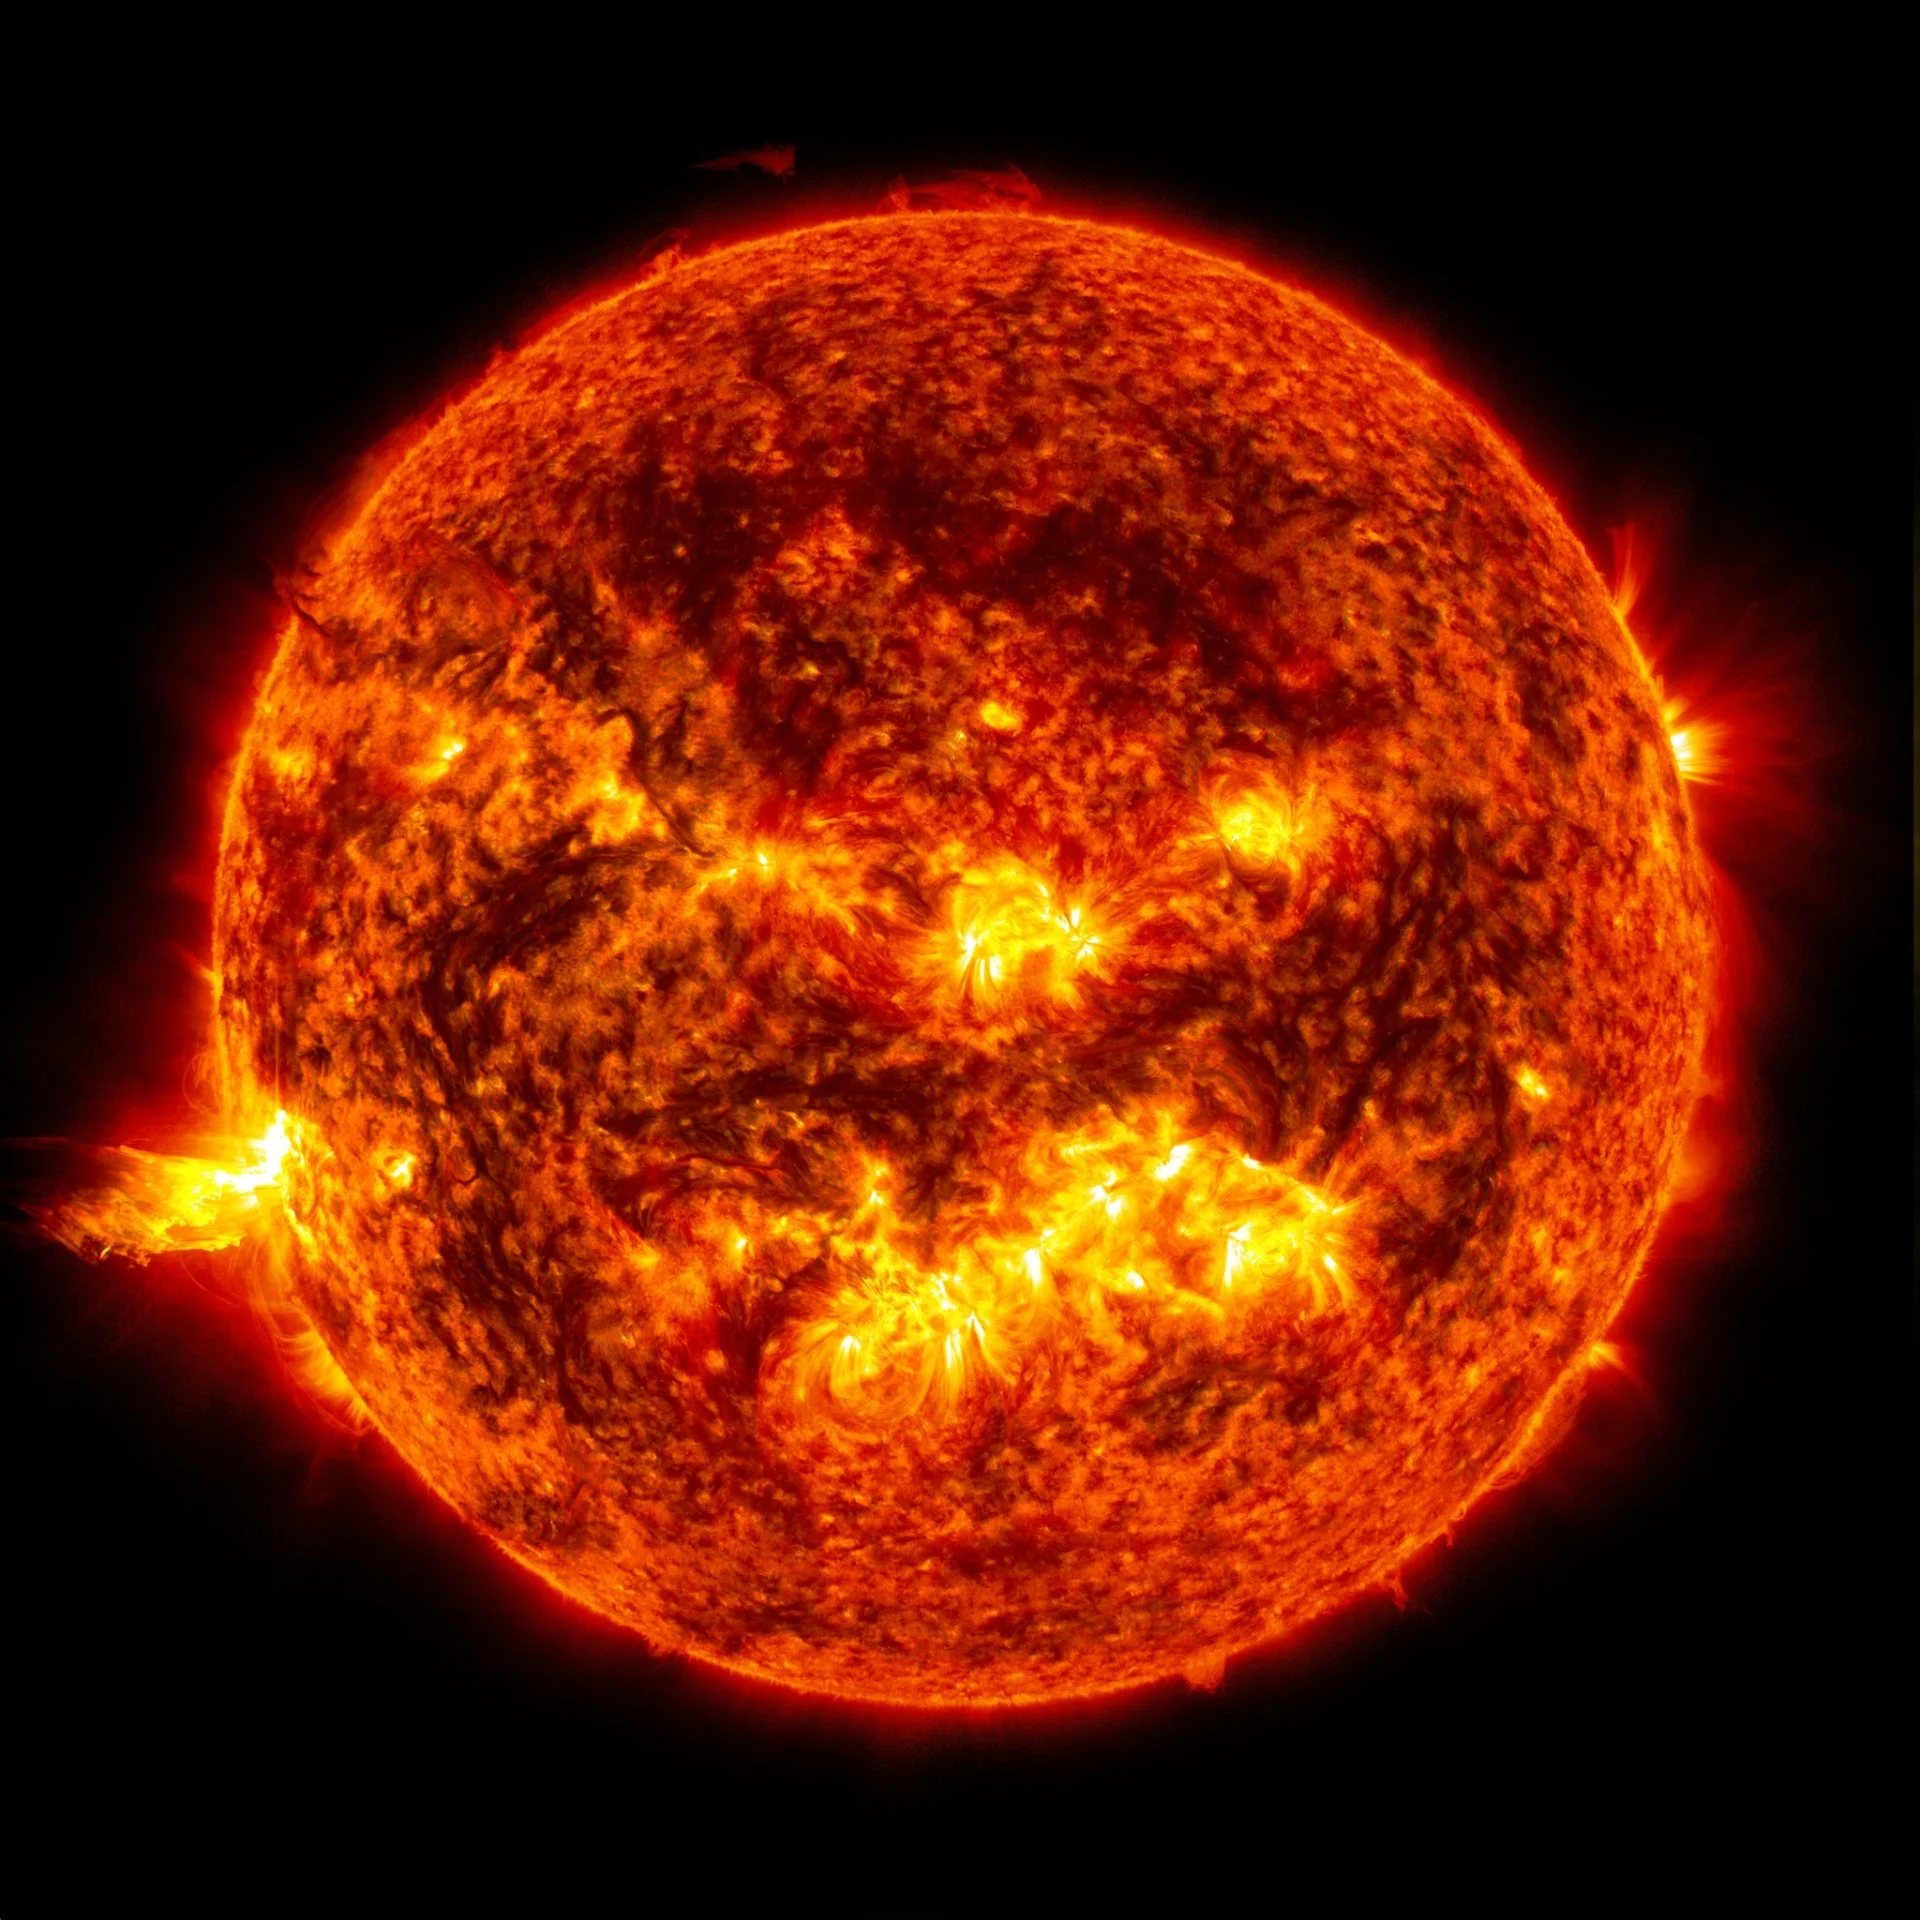 Nuclear fusion powers the Sun and stars. Here's how we can generate it on Earth